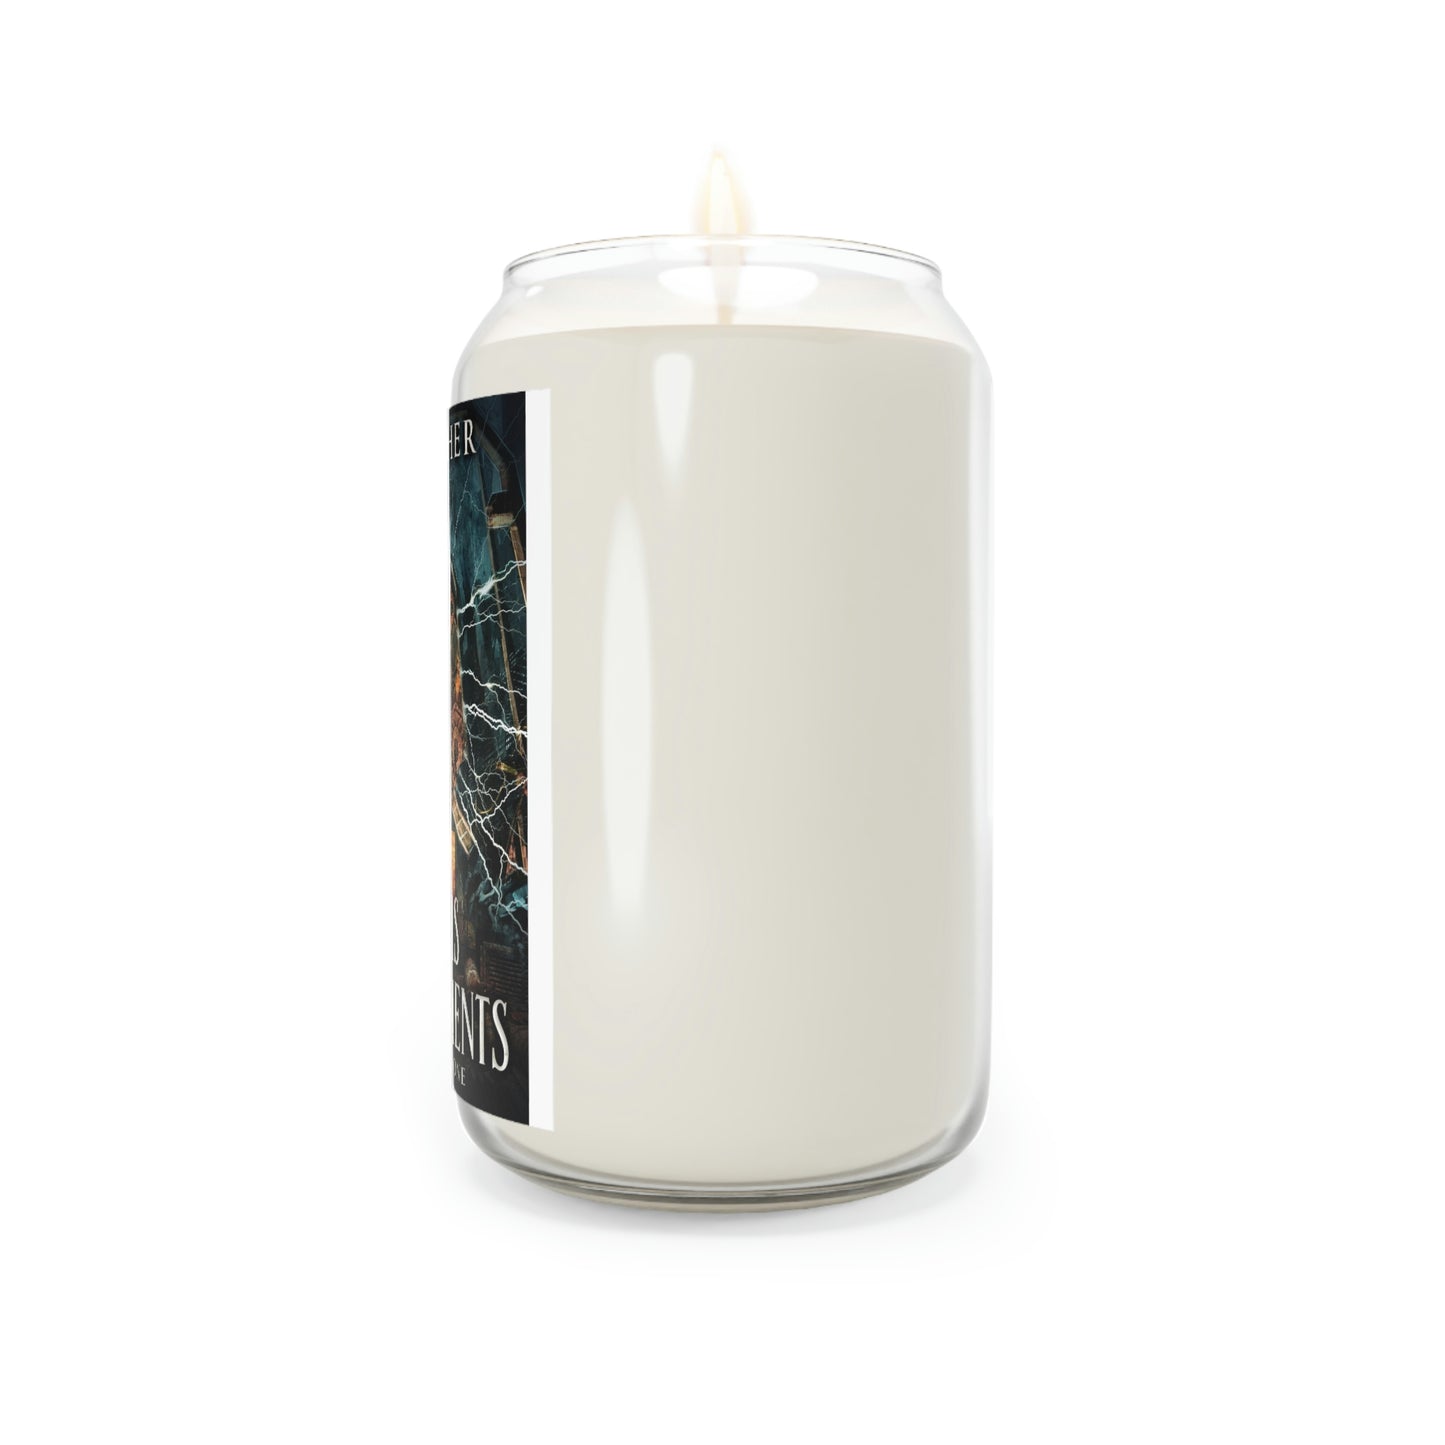 The Kalis Experiments - Scented Candle